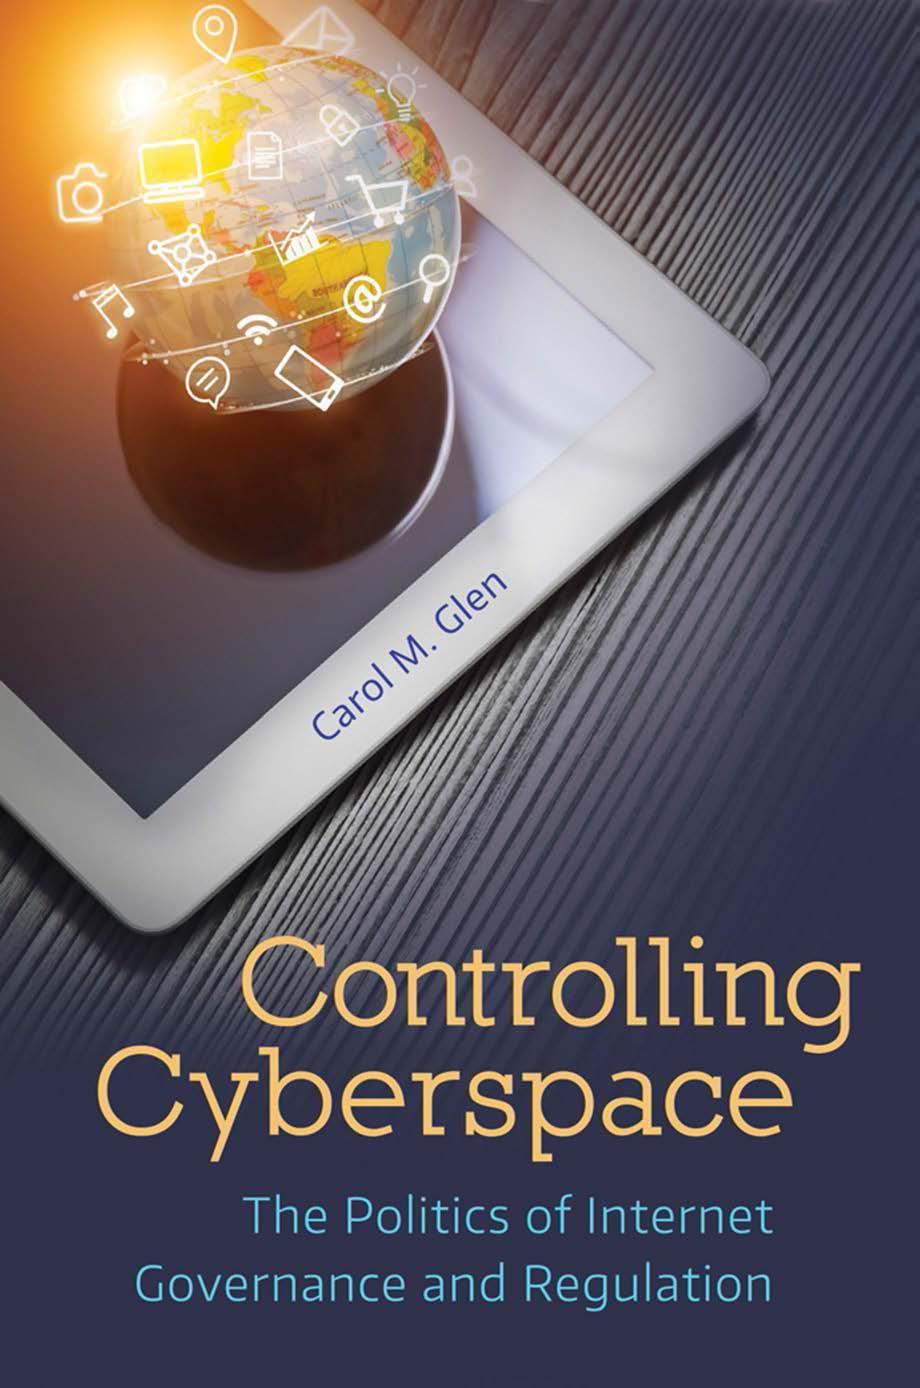 Controlling Cyberspace The Politics of Internet Governance and R.jpg